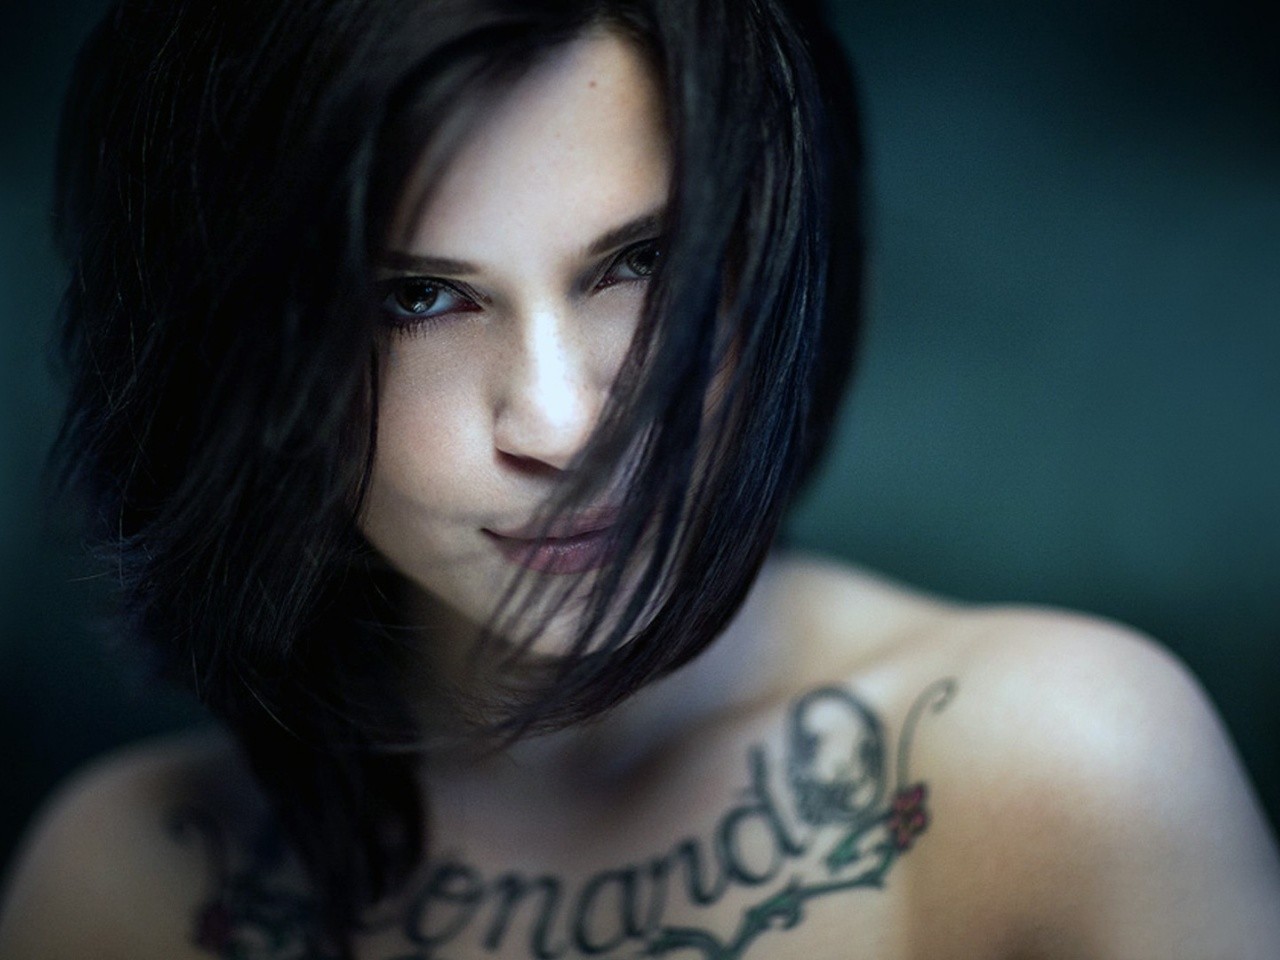 Wallpaper Tattoos Women Models Simple Background Faces Black